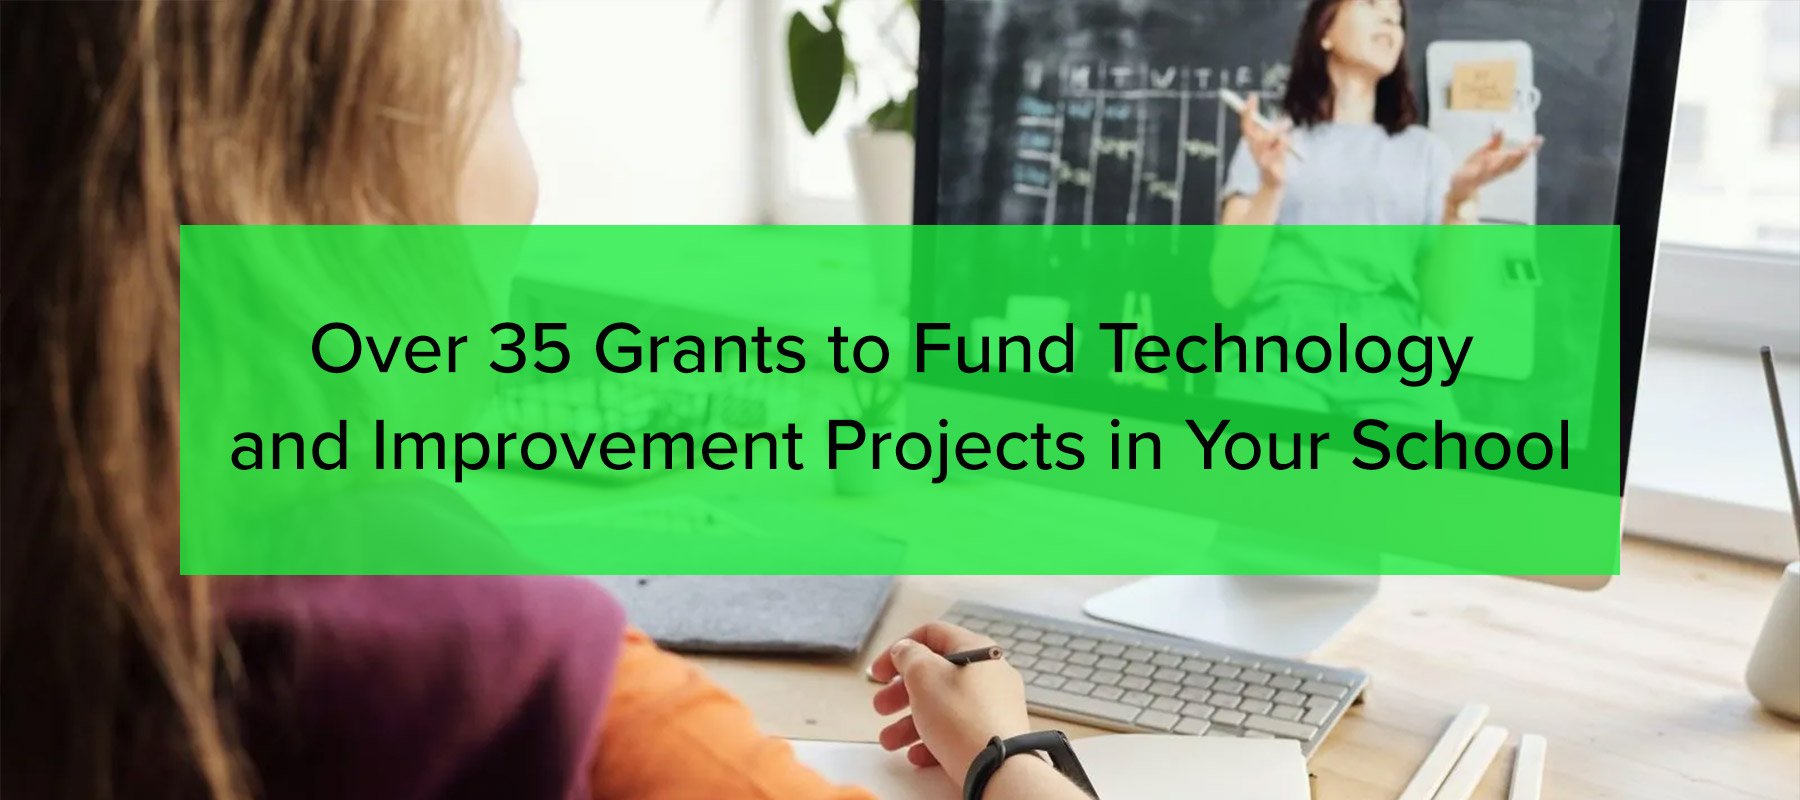 Over 35 Grants to Fund Technology and Improvement Projects in Your School